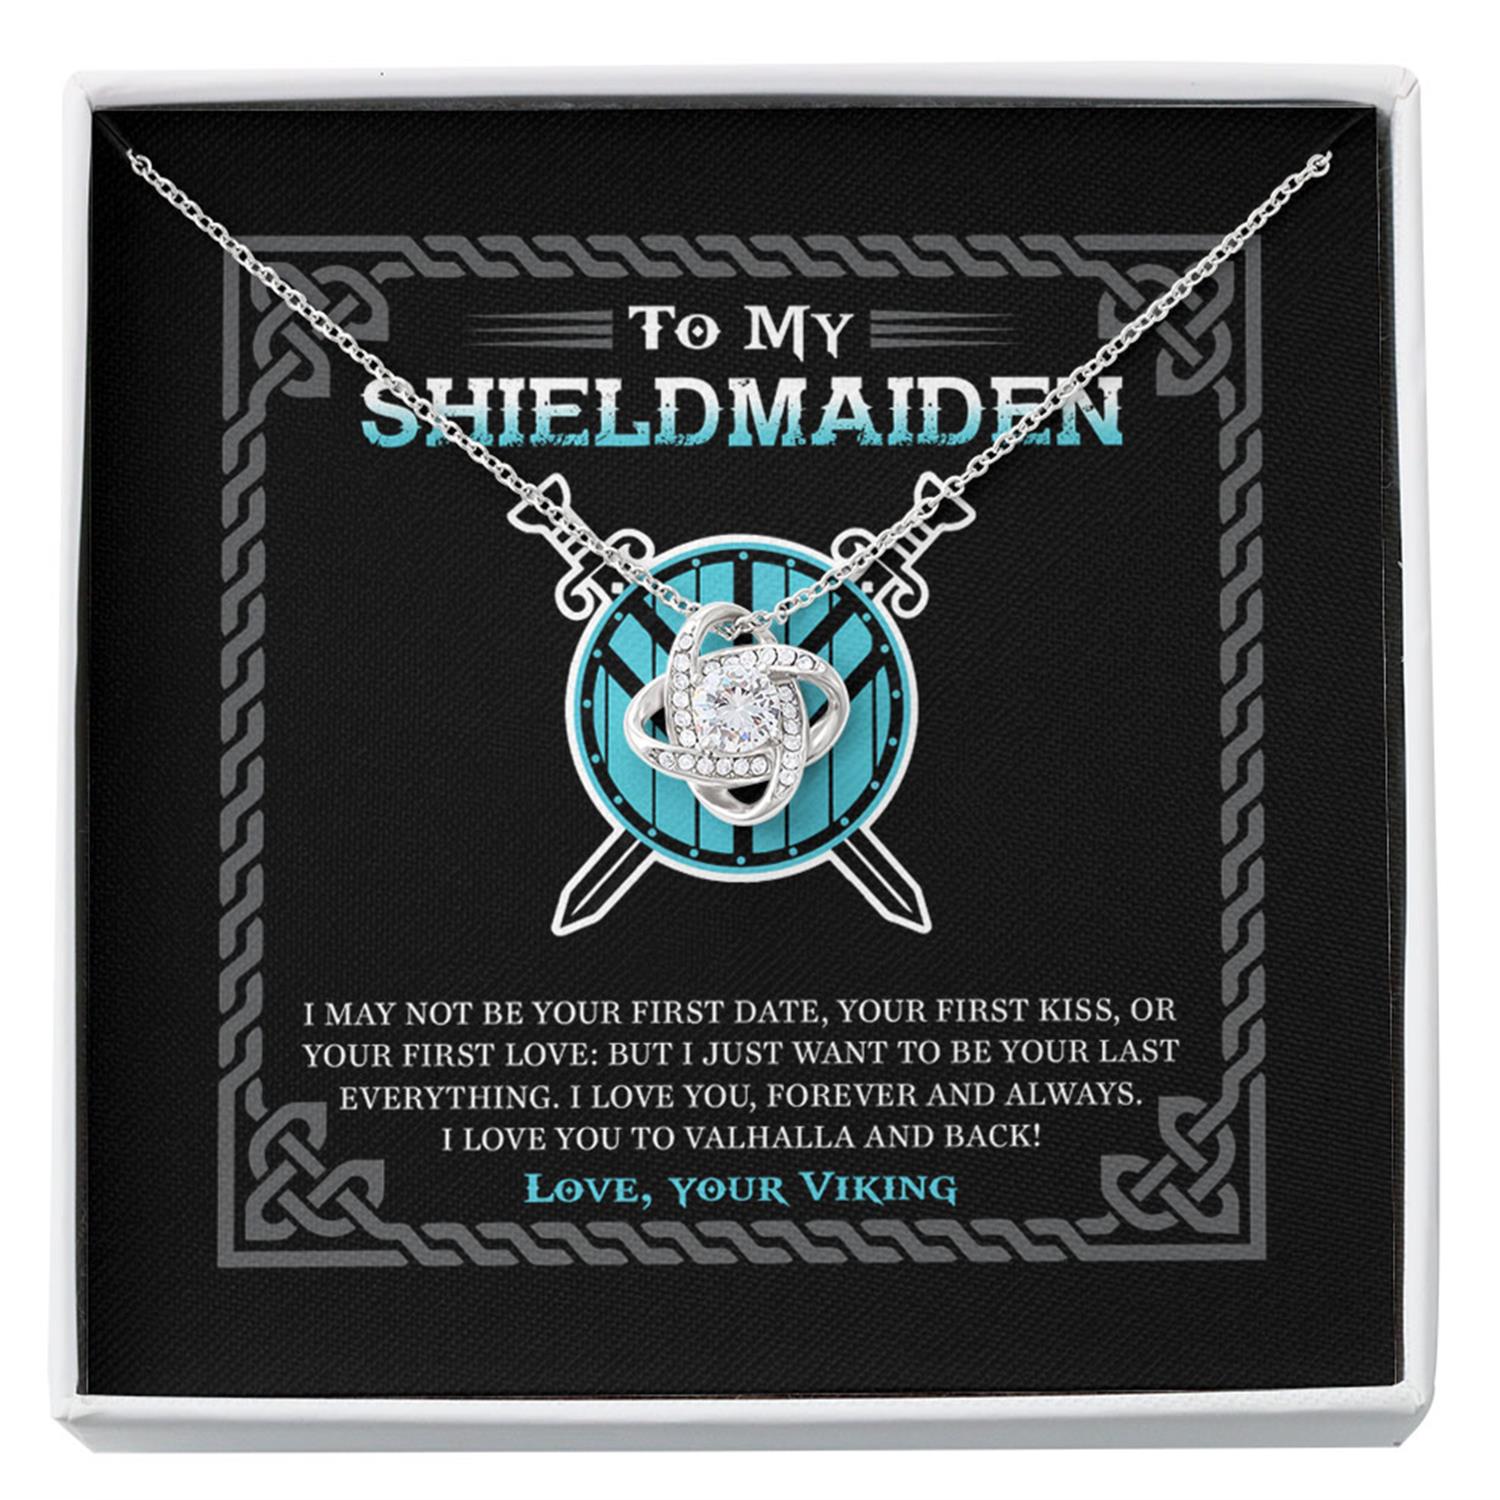 Girlfriend Necklace, Wife Necklace, To My Shieldmaiden Love You To Valhalla And Back Necklace, Wife Girlfriend Viking Gift Custom Necklace